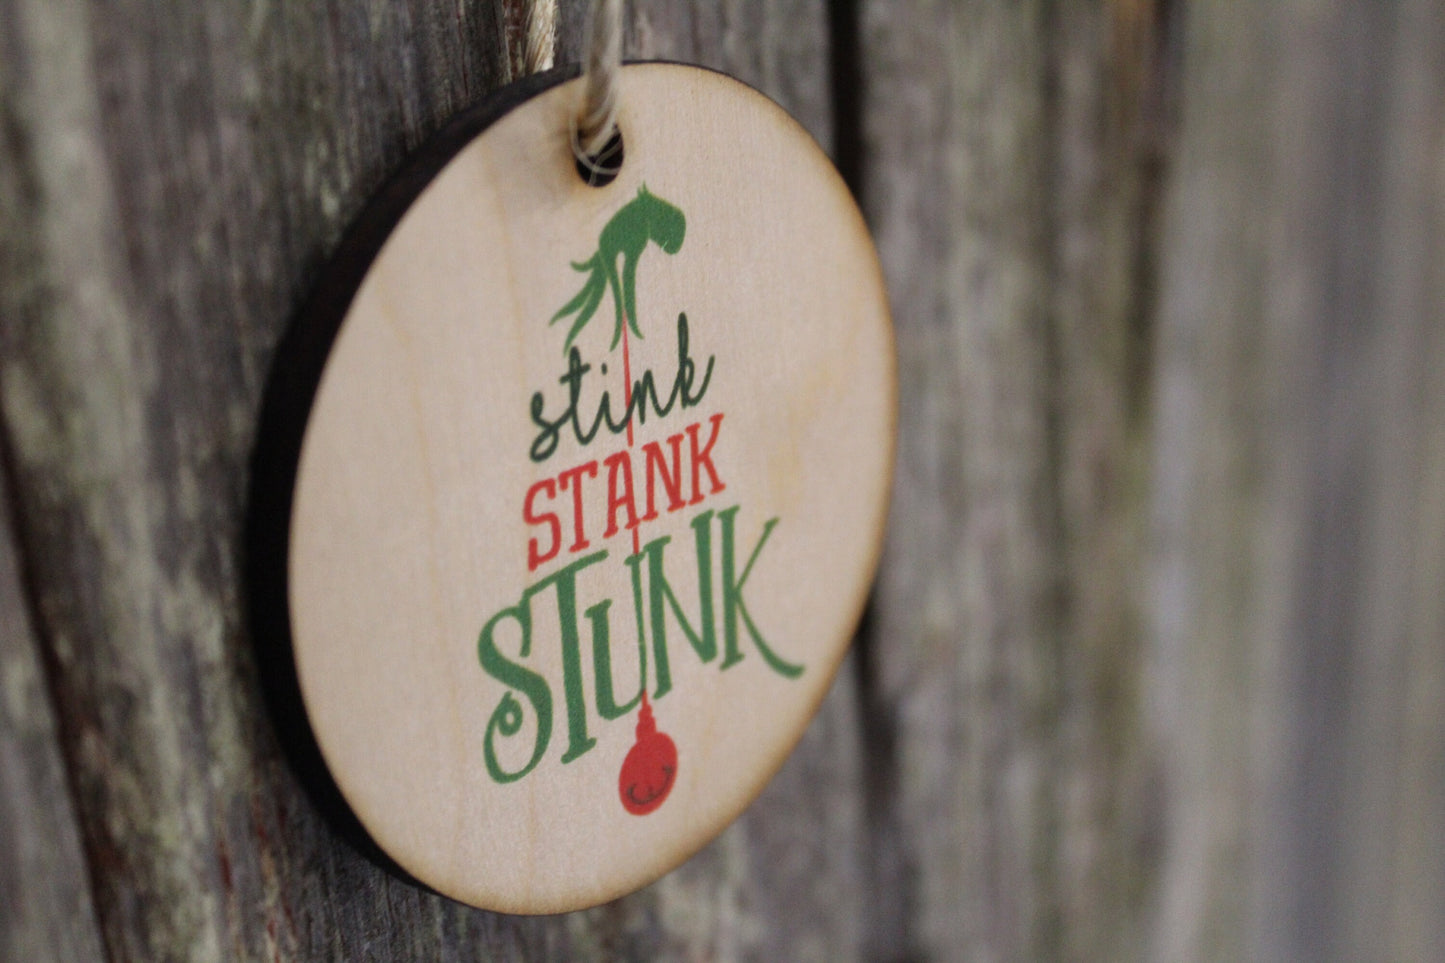 Set of 3 Stink Stank Stunk Ornament Mean One Christmas Keychain Décor Wood Sign Tree Gift Cute Funny Hand Green Festive